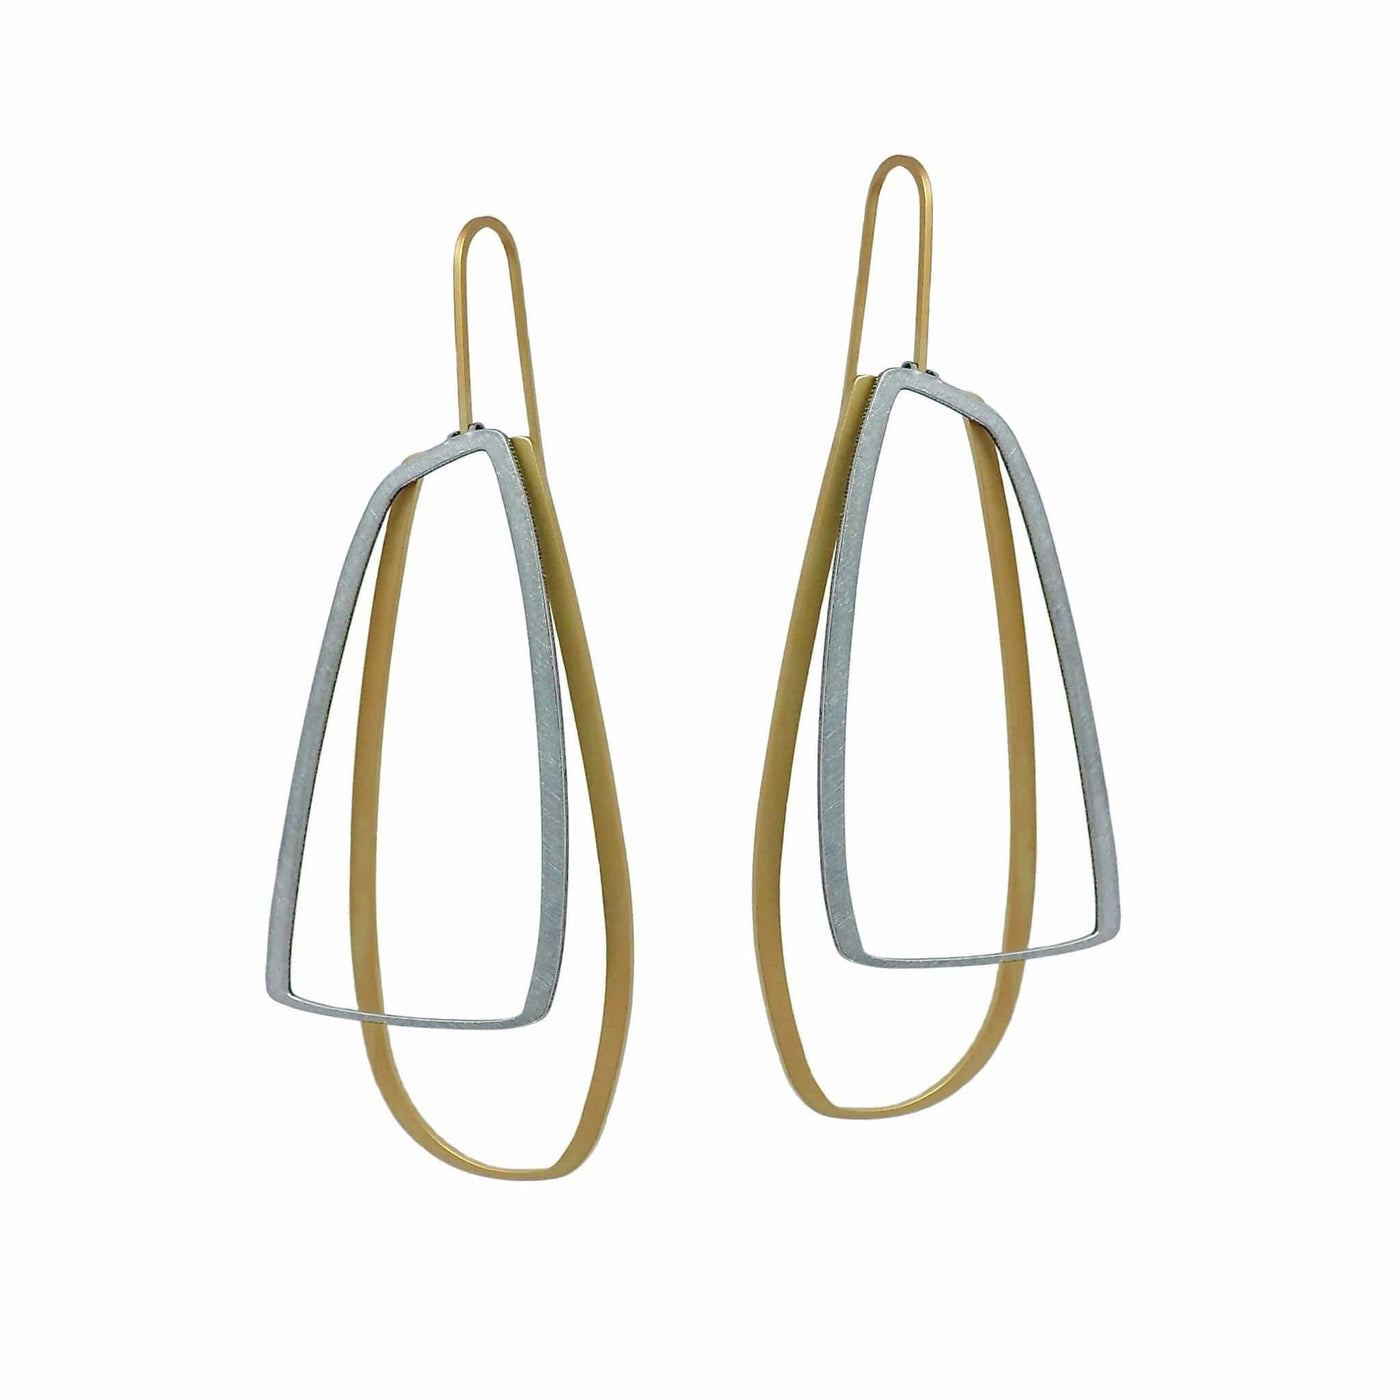 X2 Large Outline Earrings - Gold/ Raw - inSync design